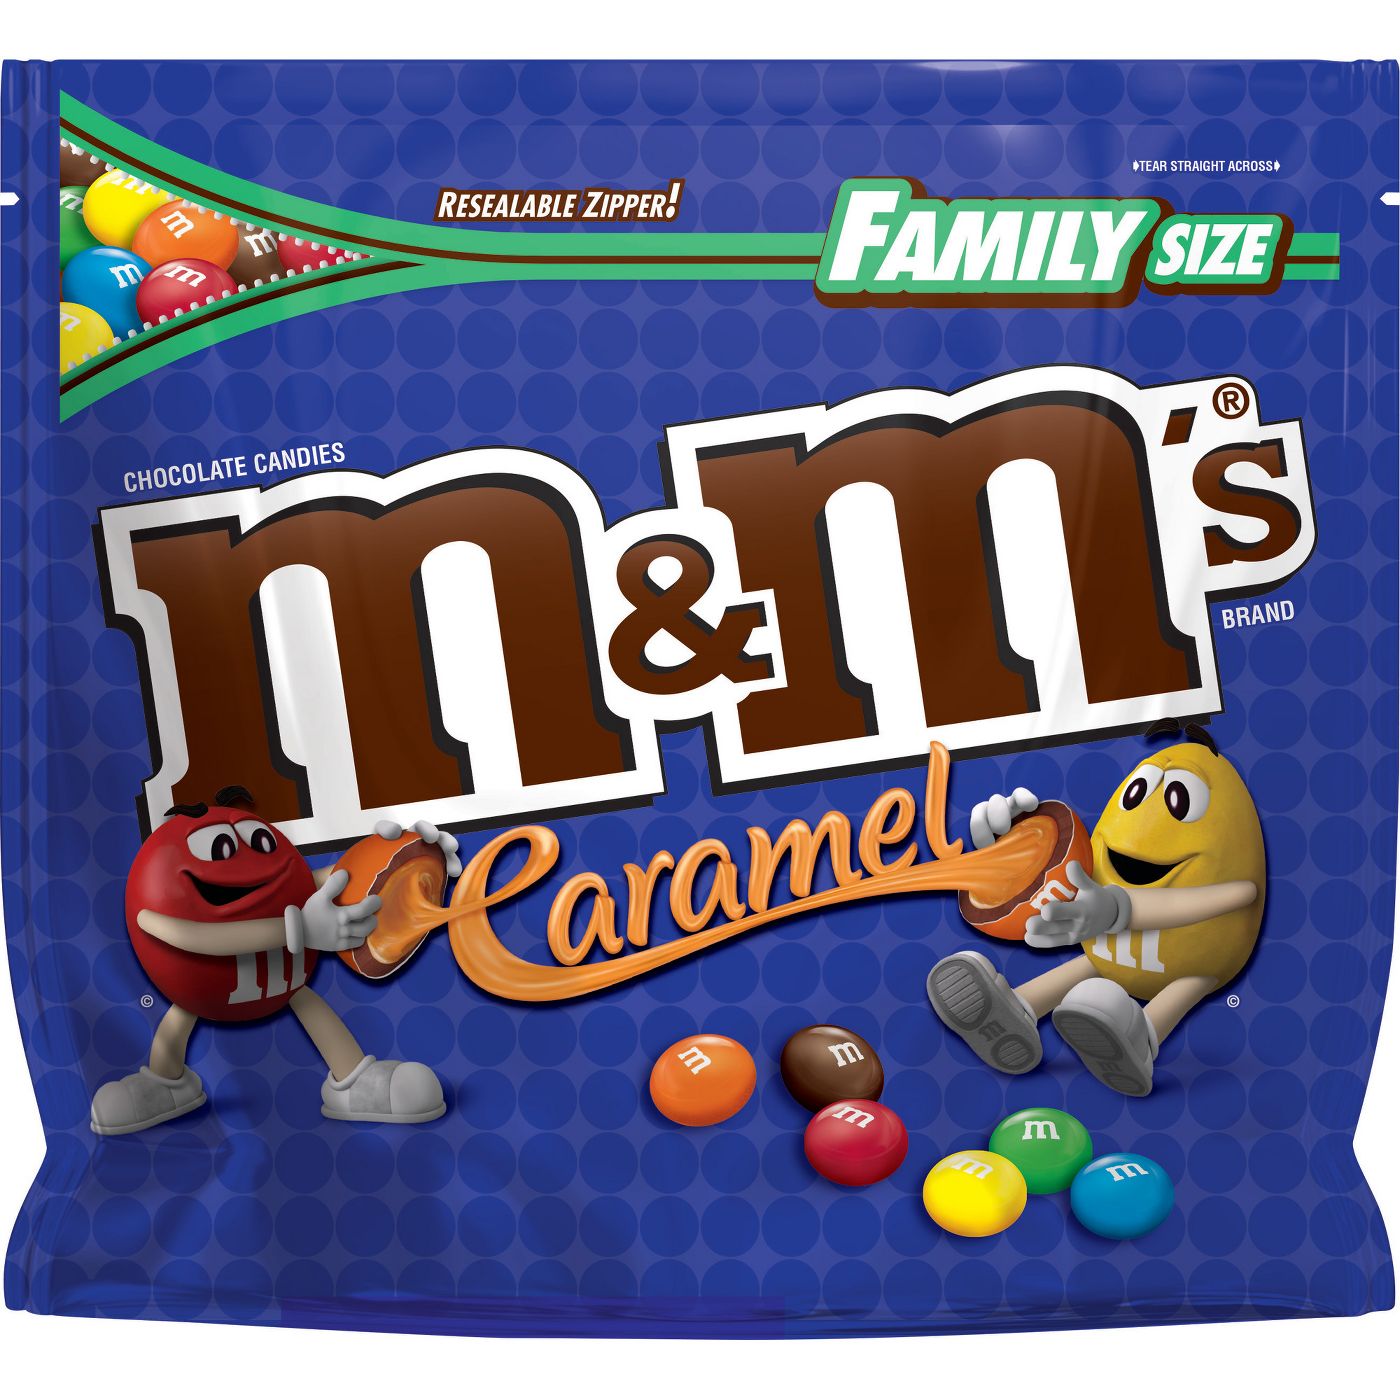 M&Ms Peanut Butter Chocolate Candy, Family Size 18.4 oz.